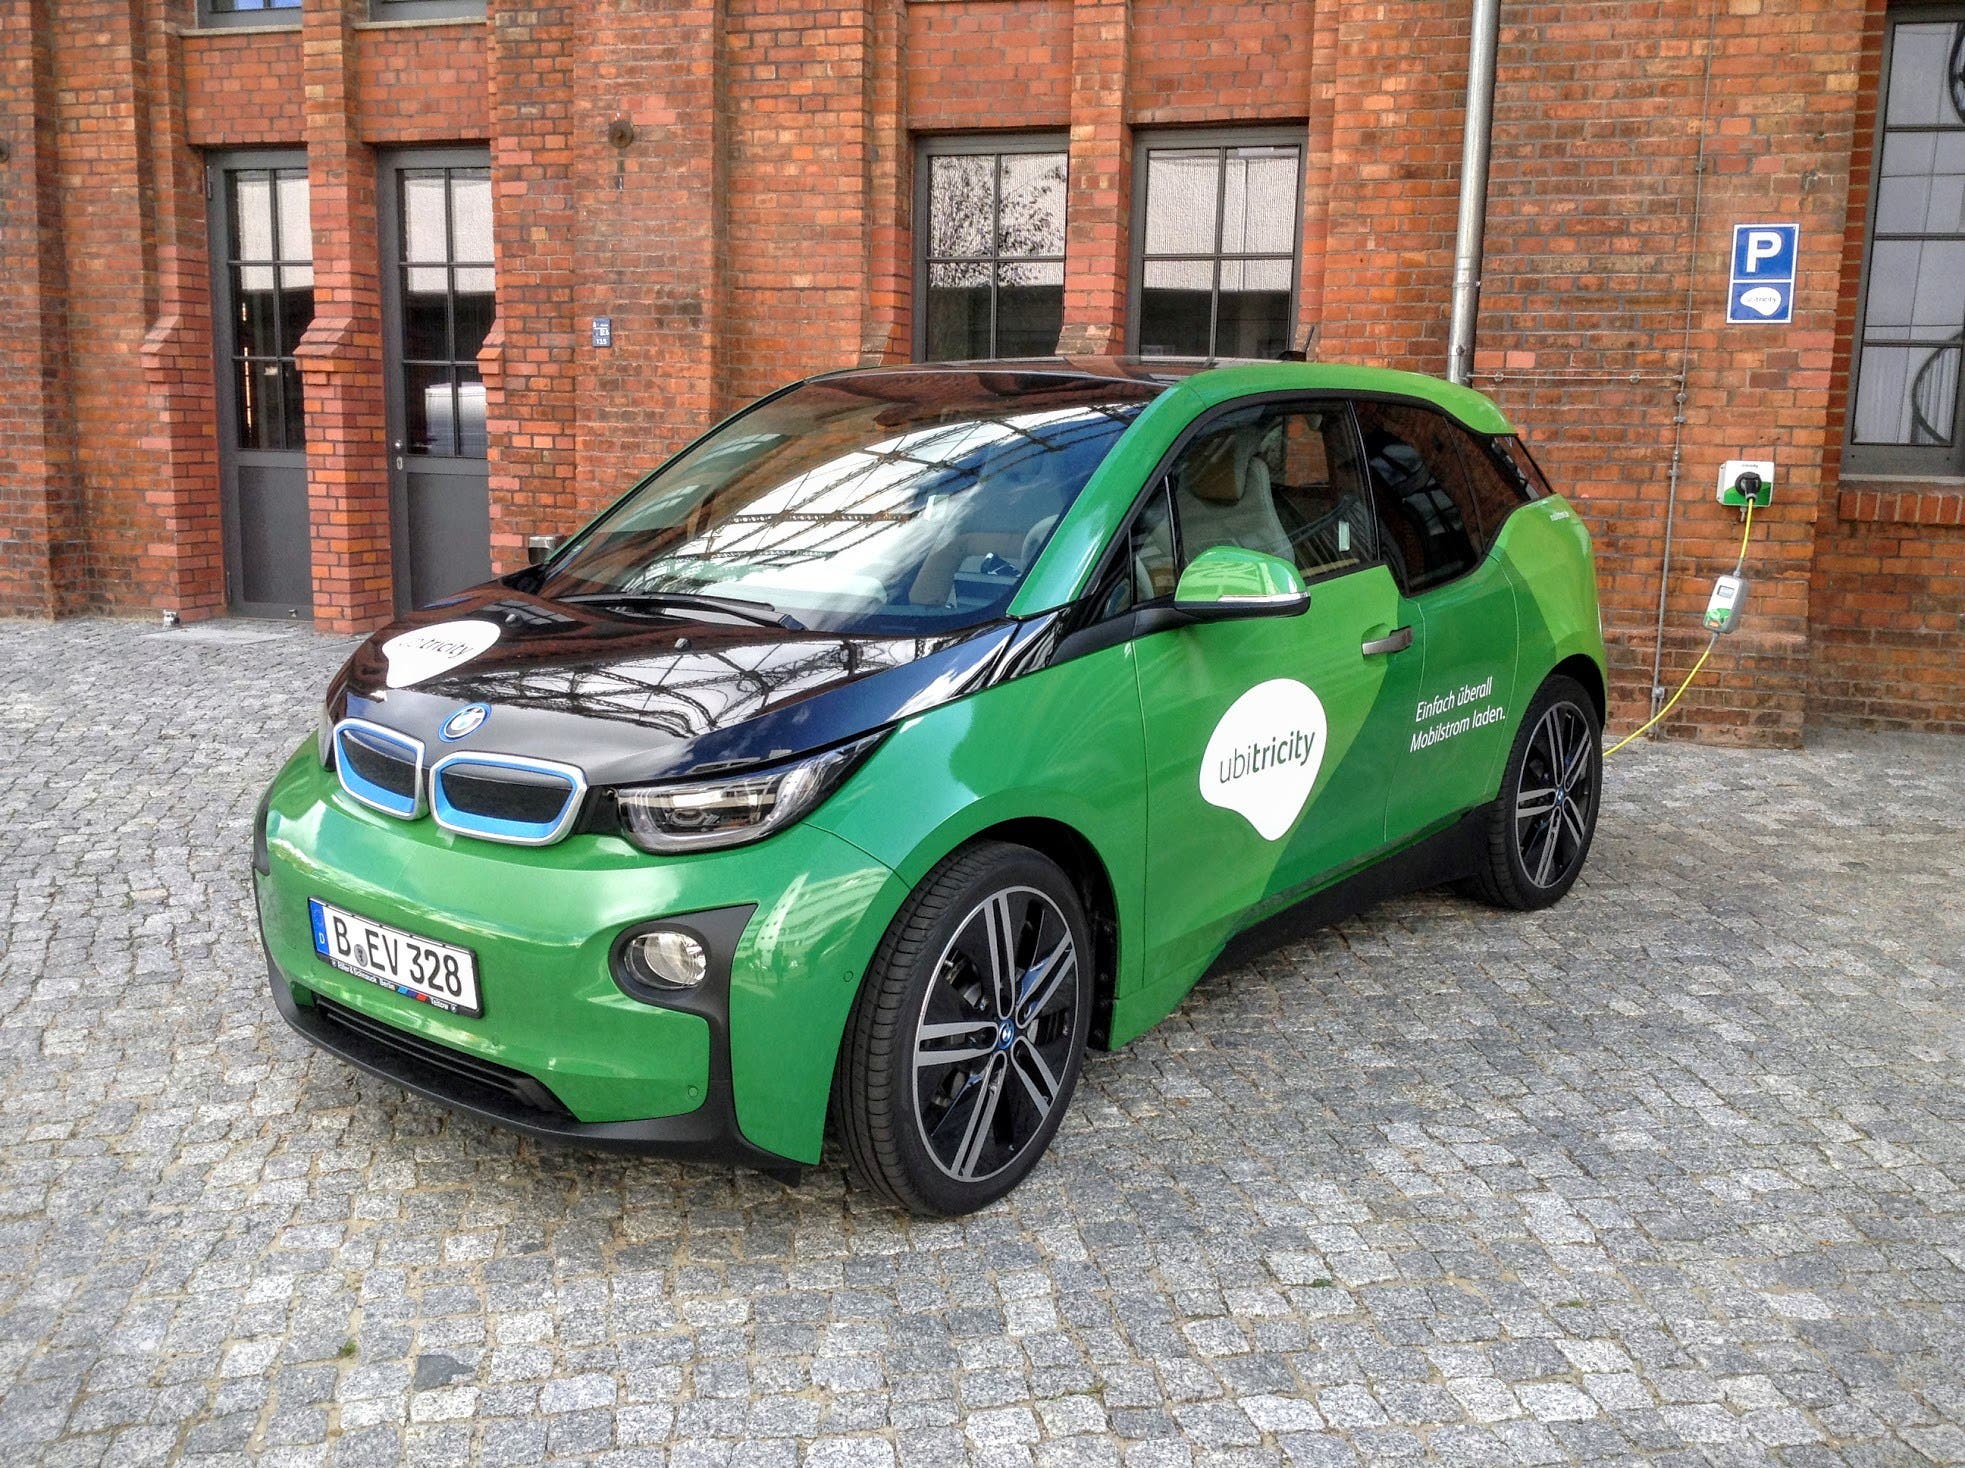 41% Prefer an Electric Vehicle (But How Reliable are the Numbers?)